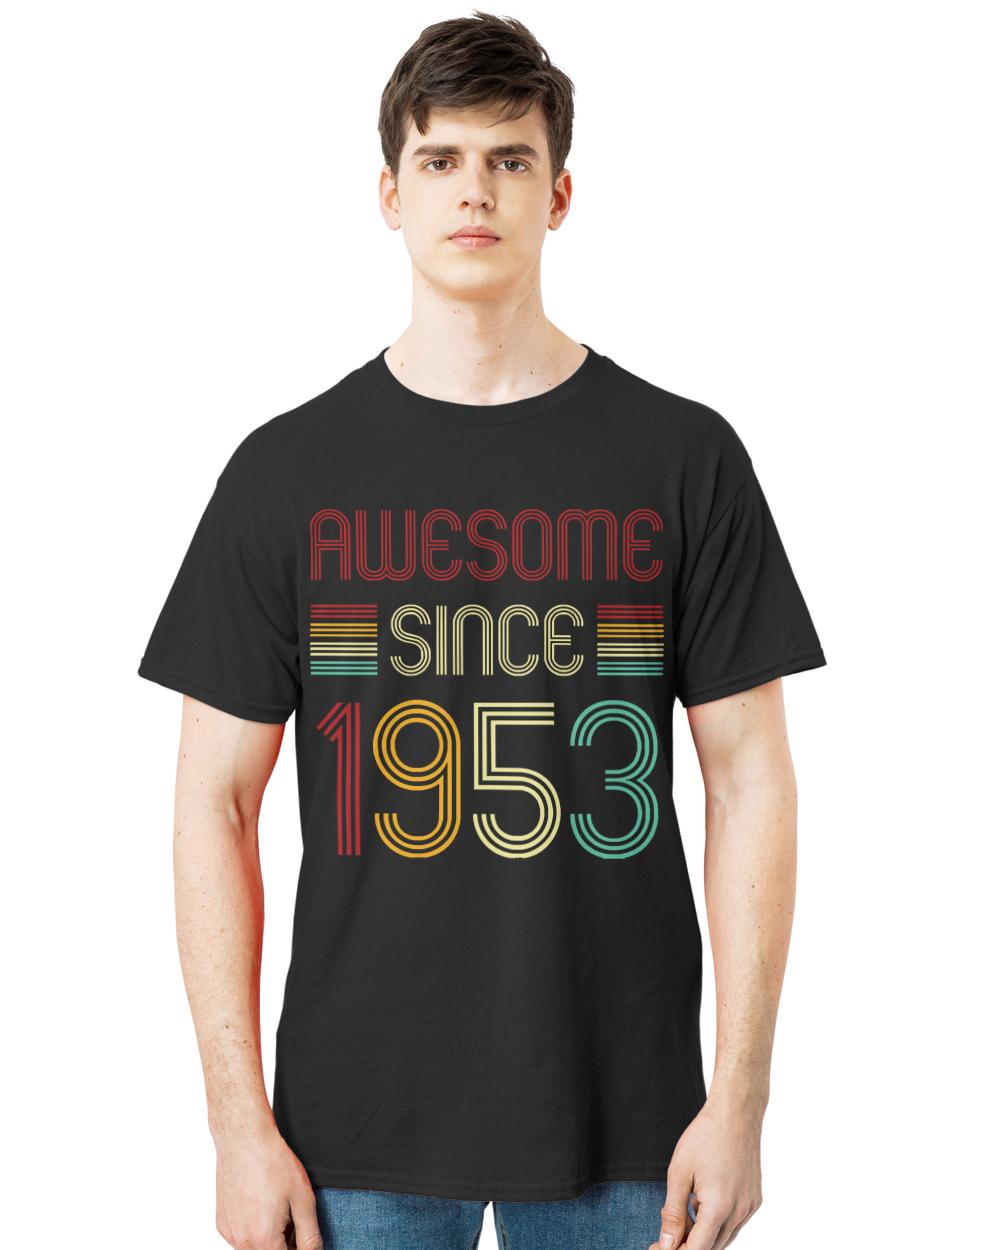 Vintage Awesome Since 1953 T-ShirtVintage Awesome Since 1953 T-Shirt